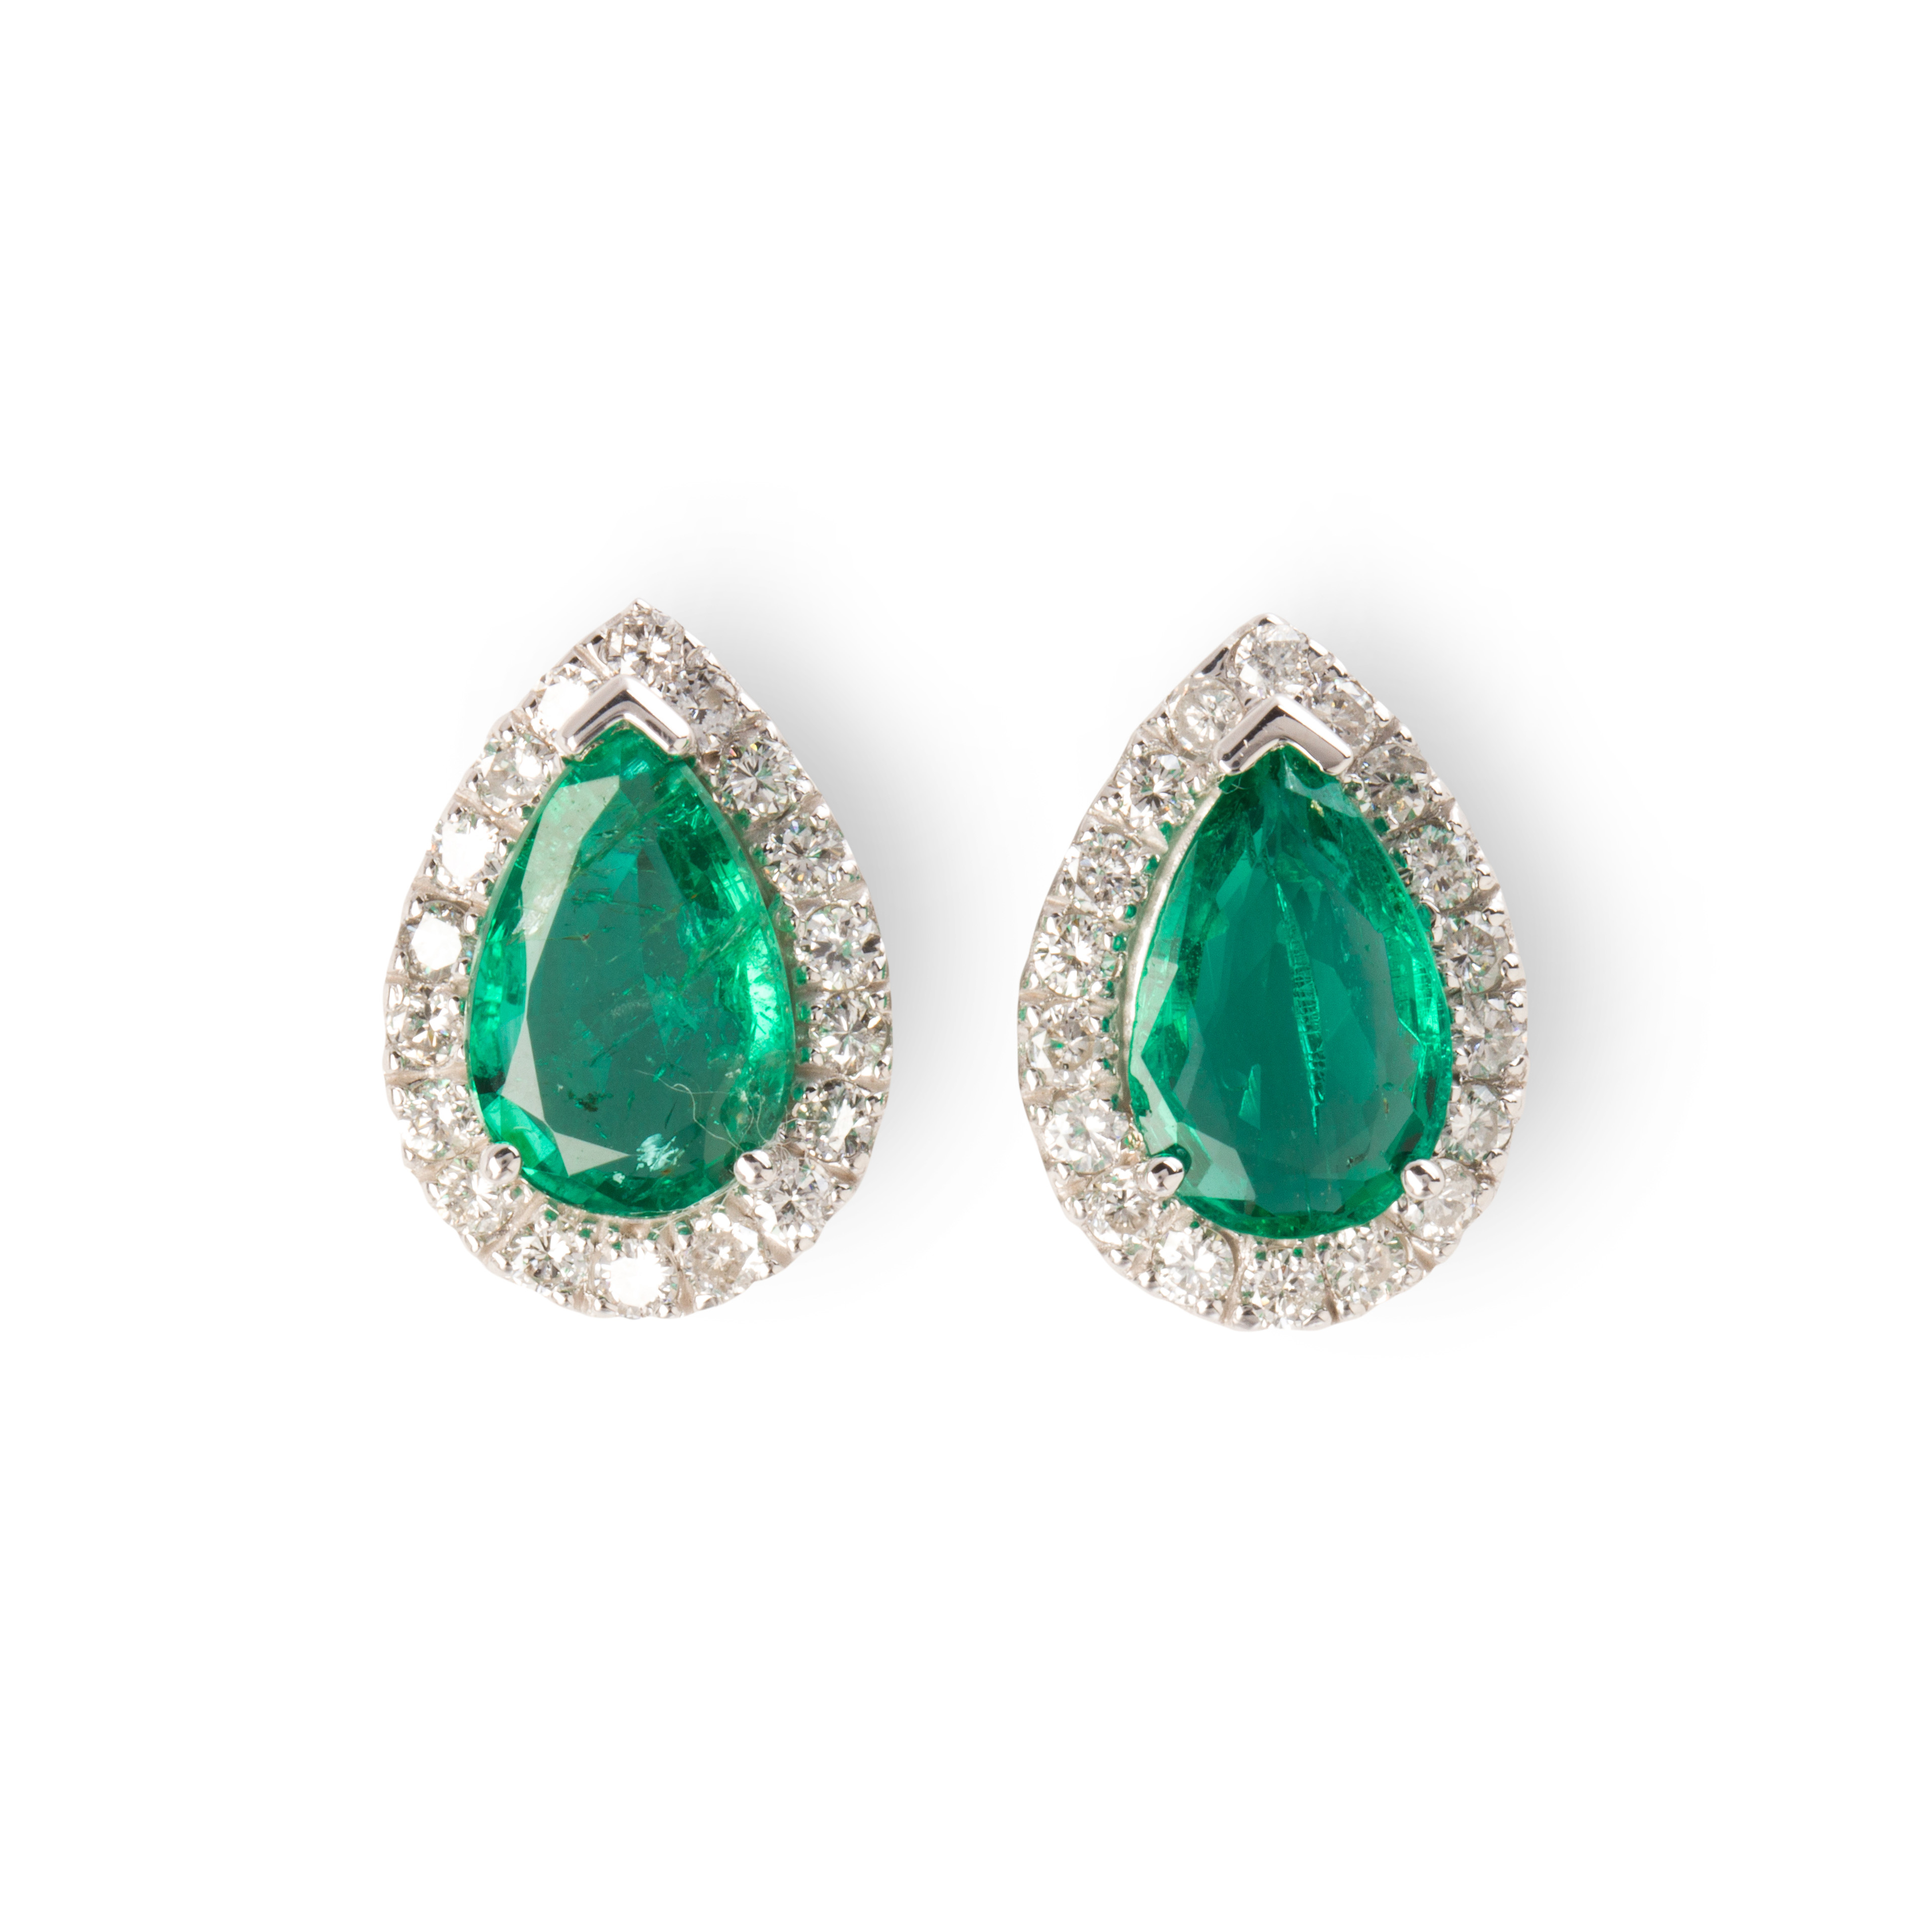 A PAIR OF EMERALD, DIAMOND AND